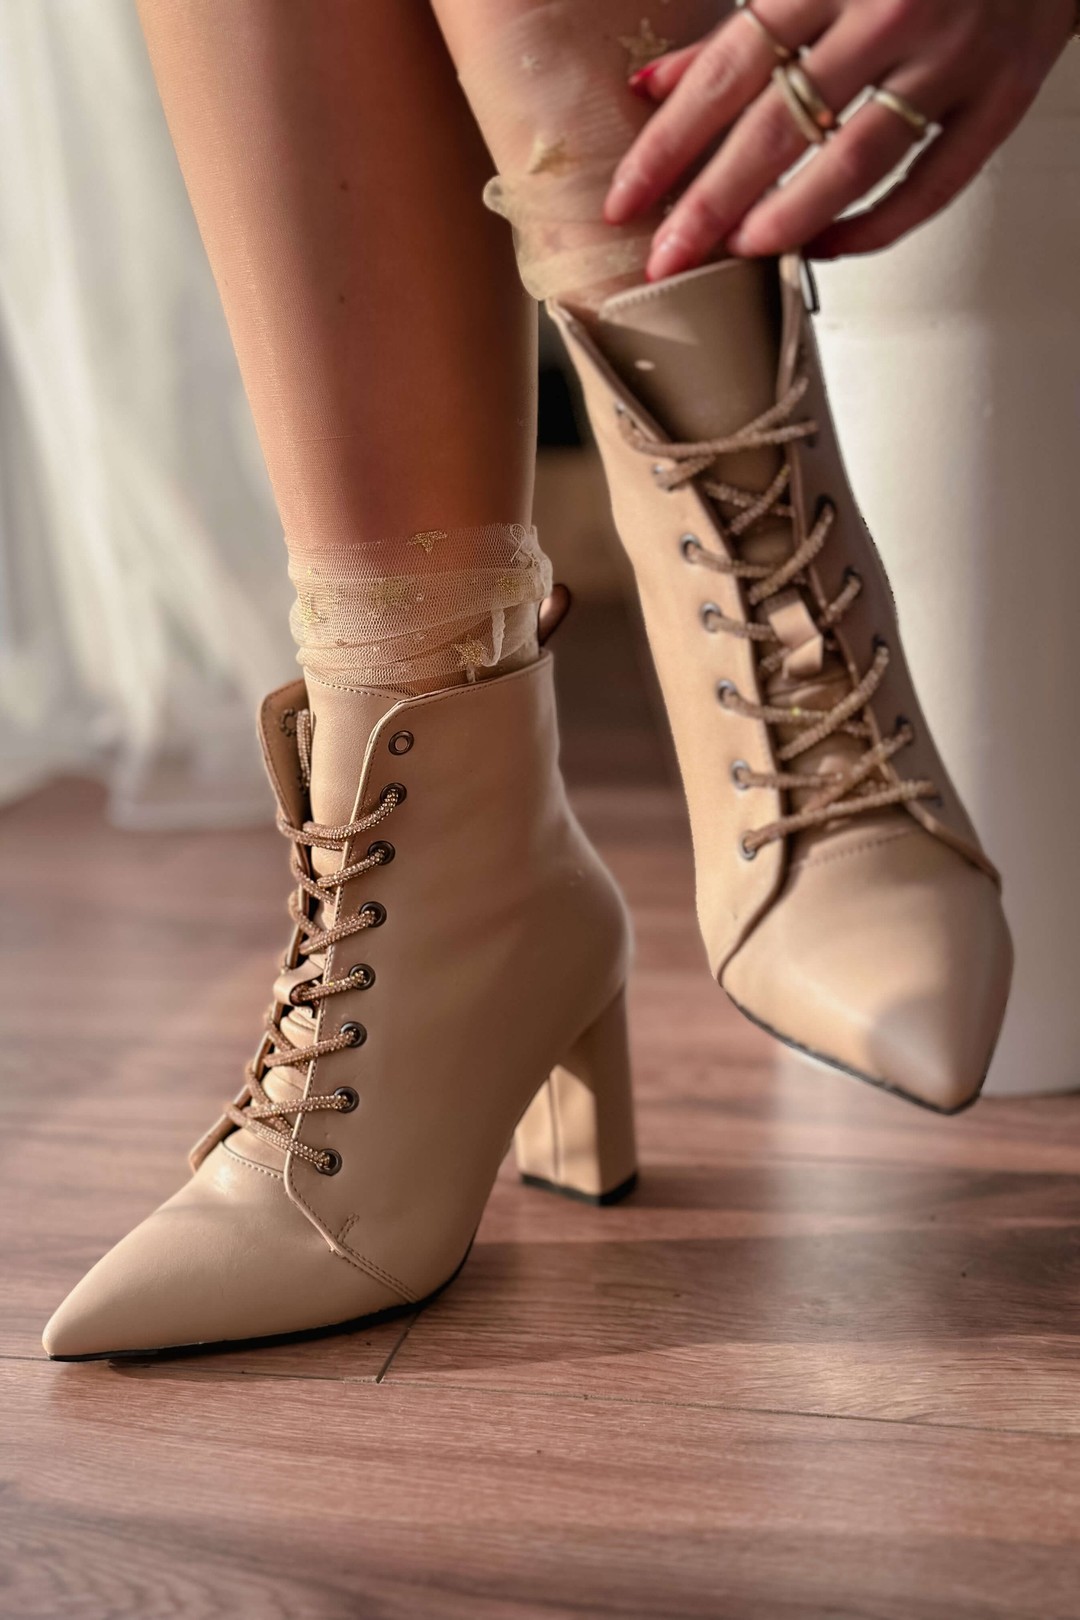 Women's Bootie Models & Prices - I Love Shoes